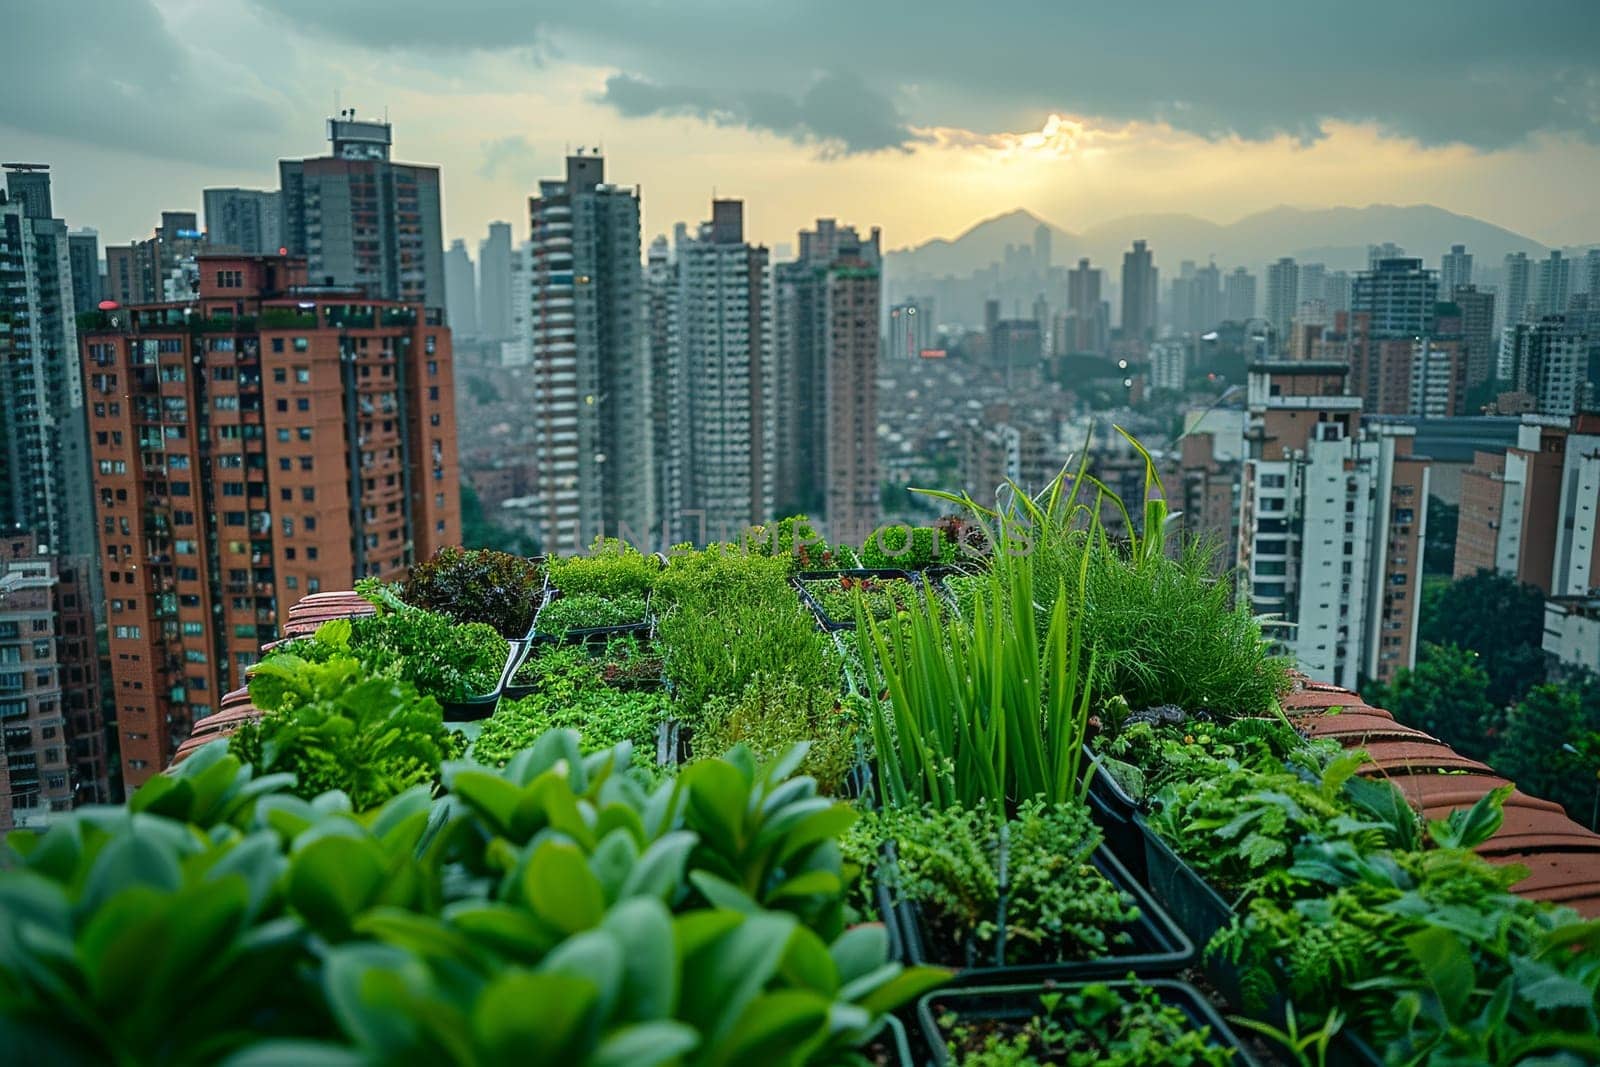 A cityscape with a rooftop garden filled with various vegetables and plants. The garden is a peaceful oasis in the midst of the bustling city